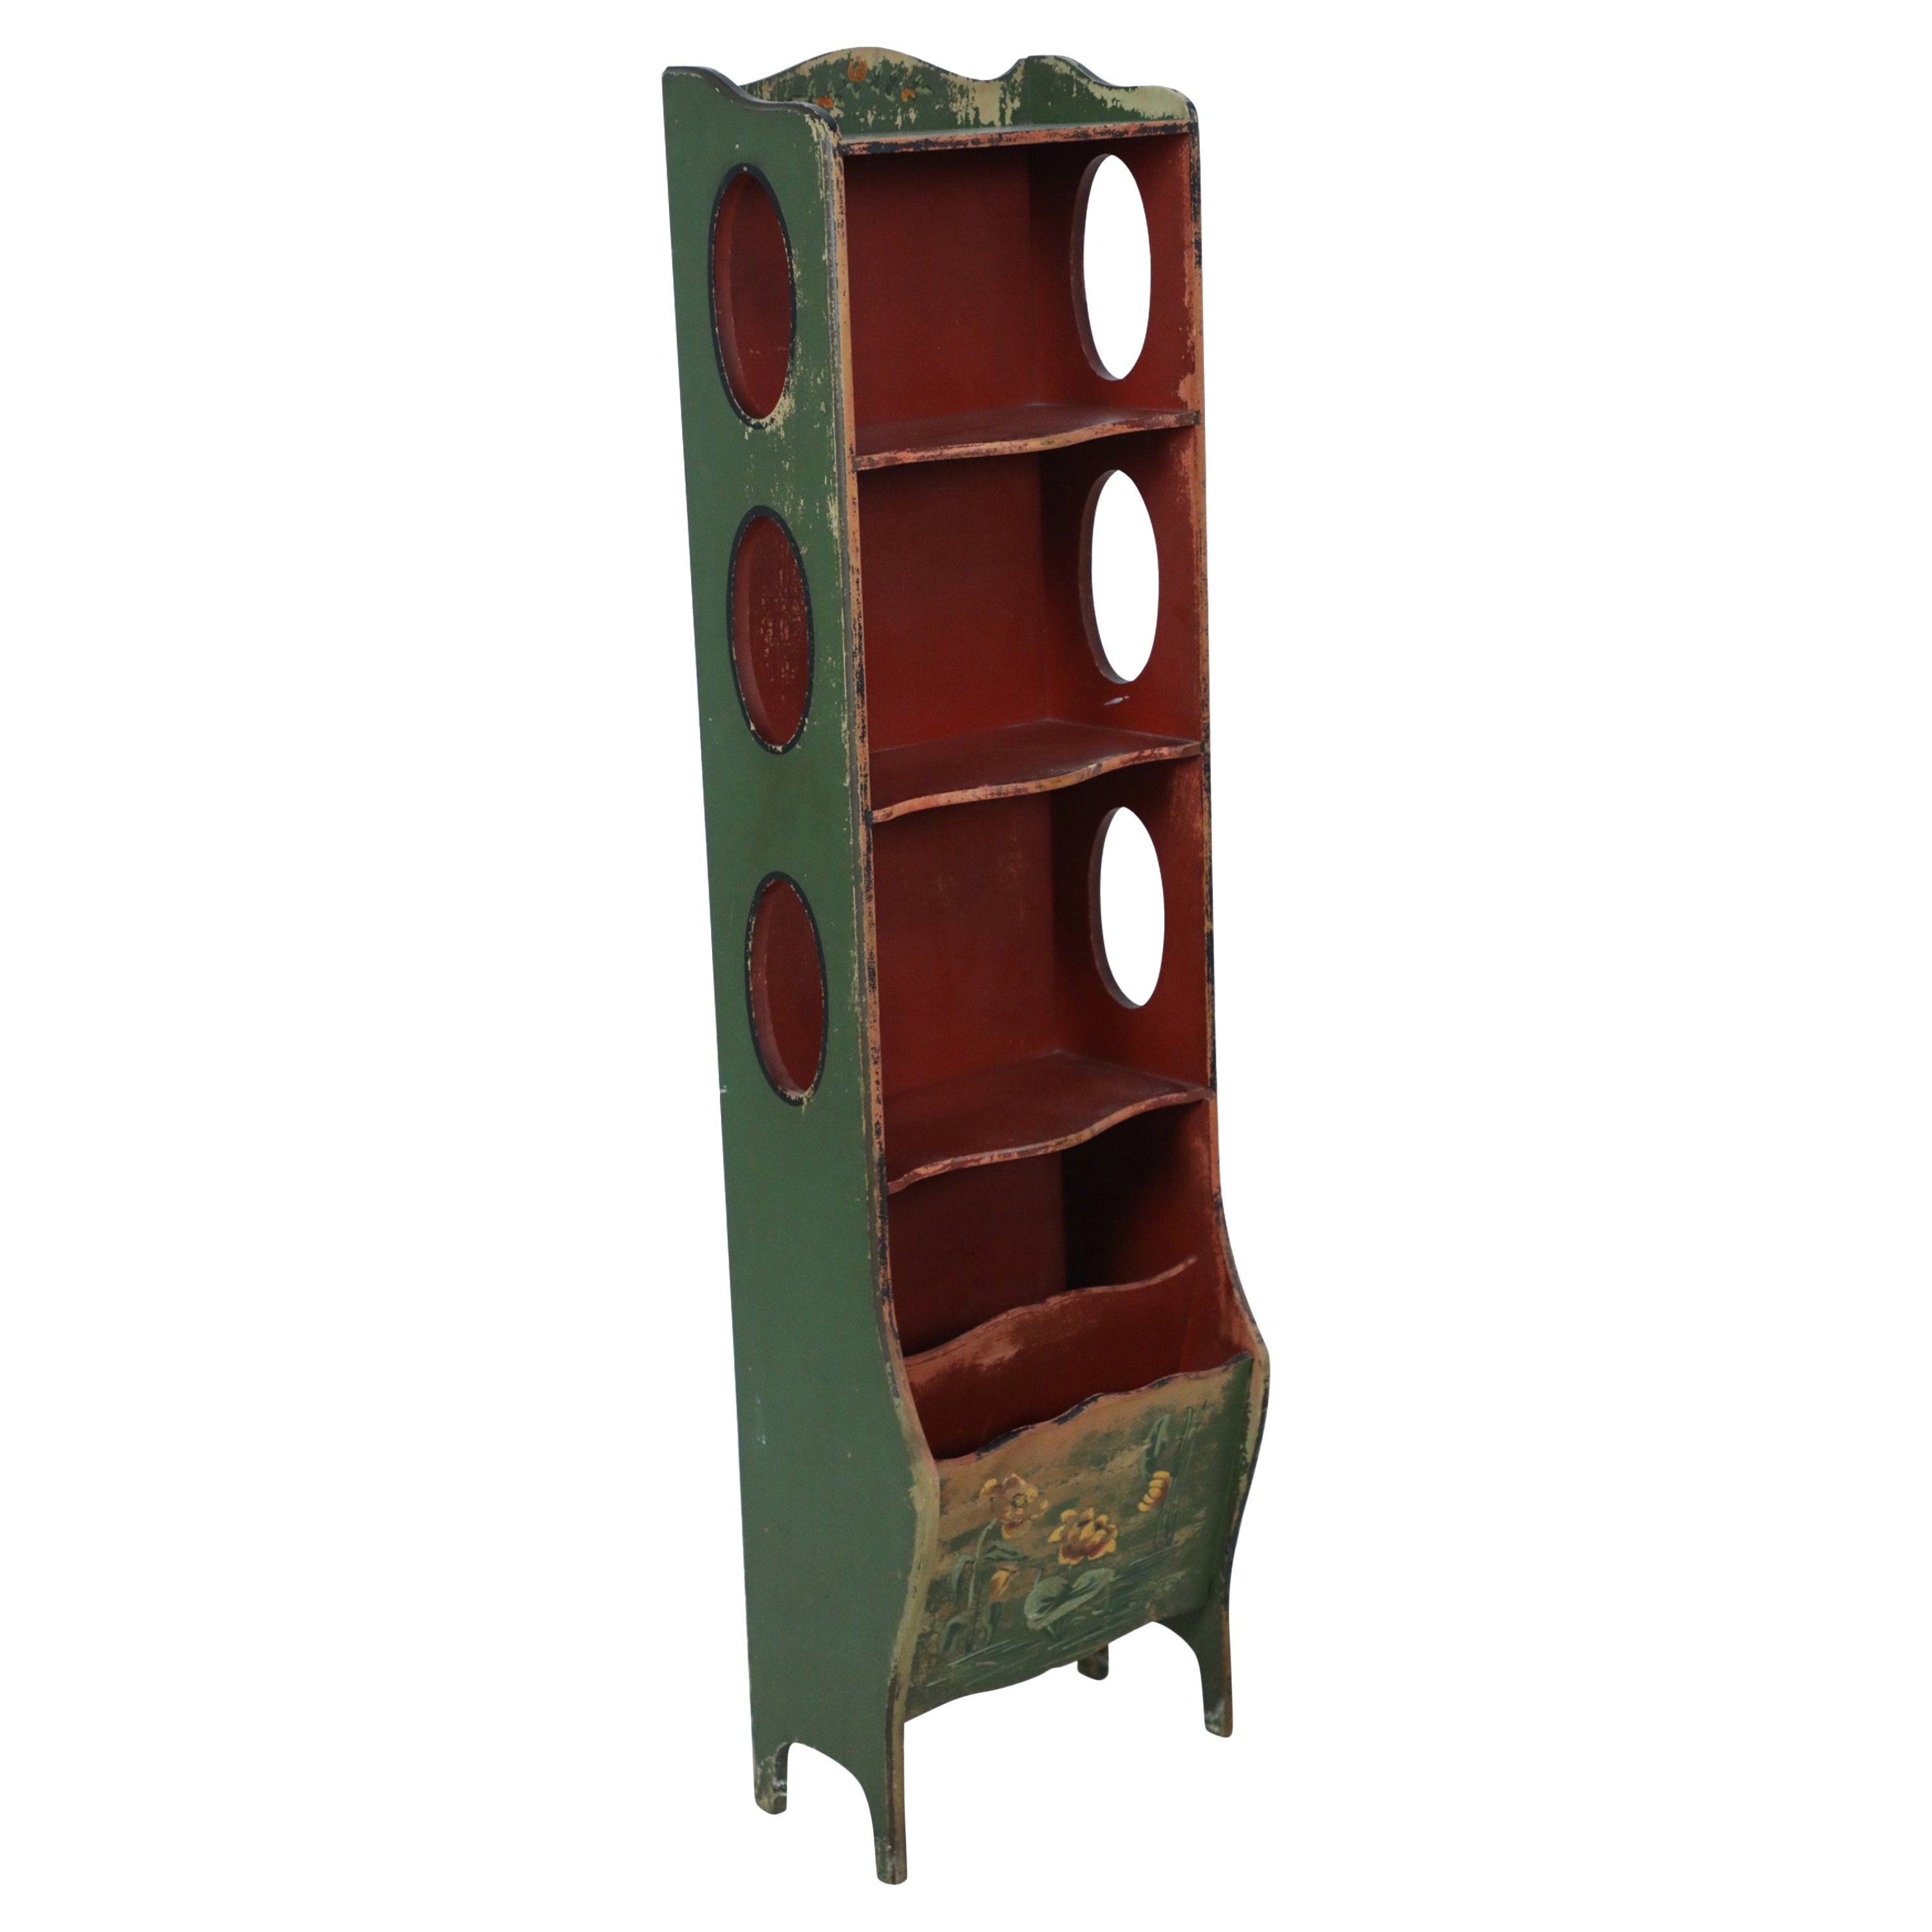 American Art Deco Style Painted Bookcase